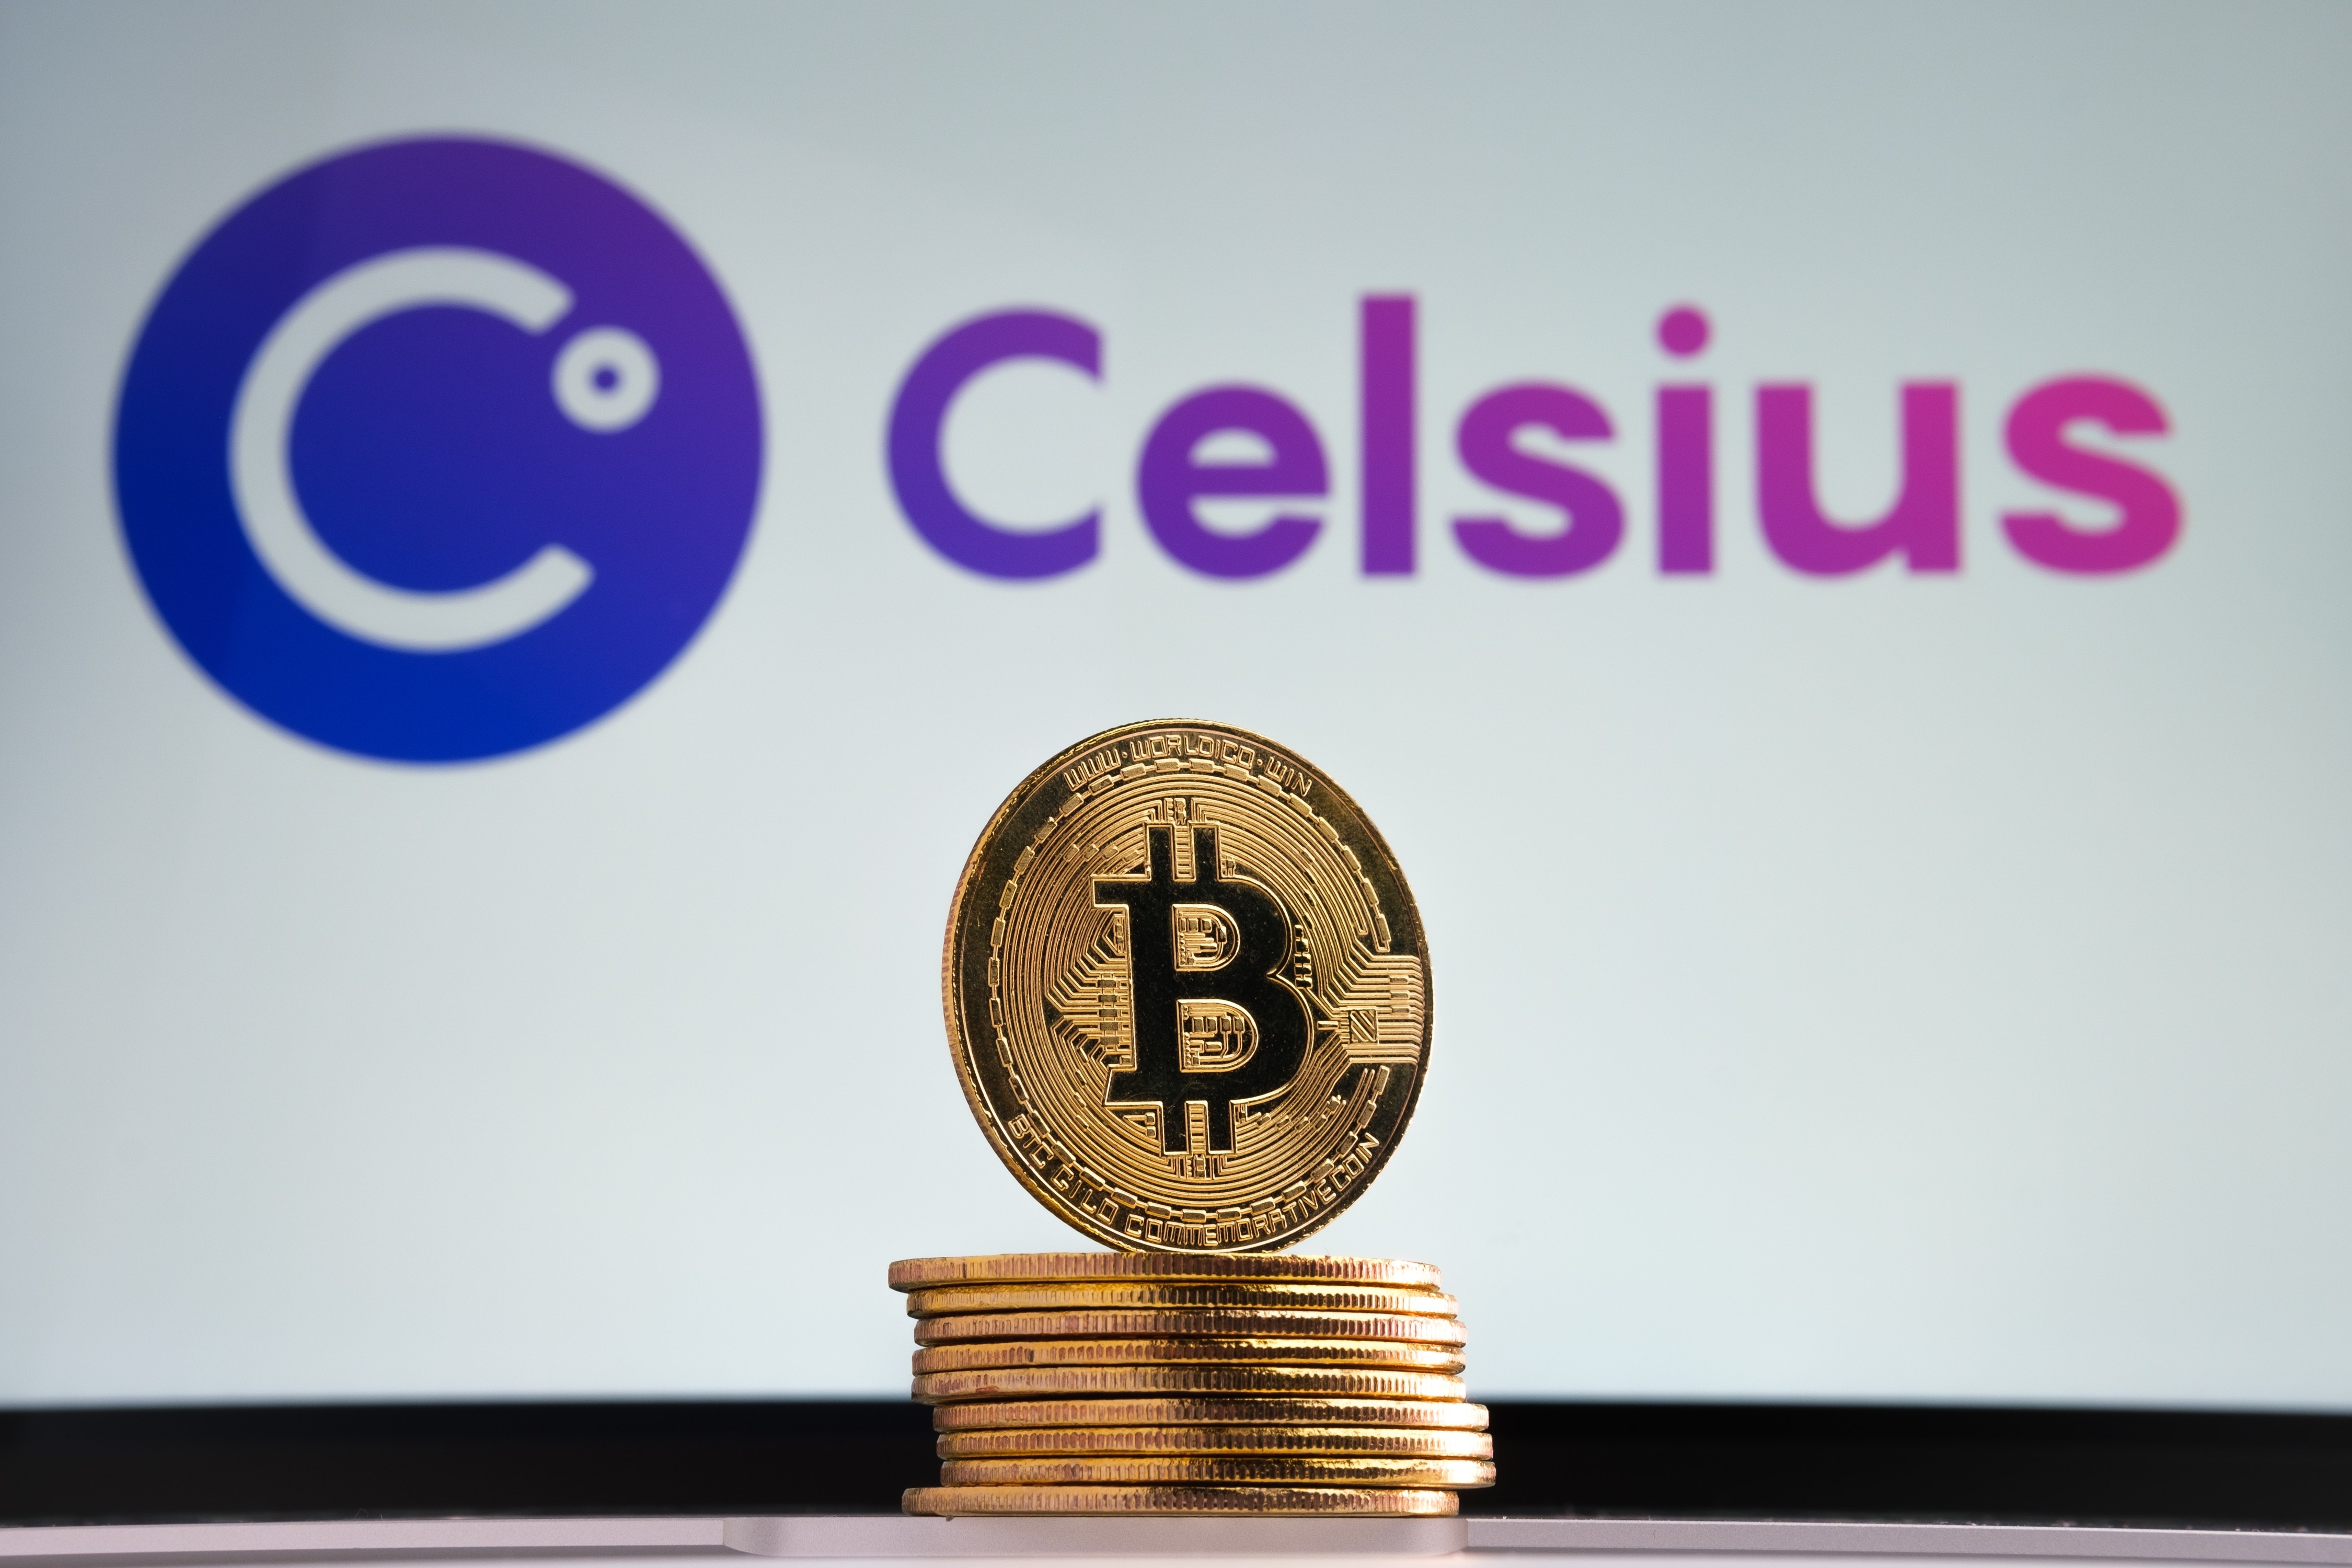 Celsius Network Announces Shift To Crypto Custody Business Model: What You Need To Know